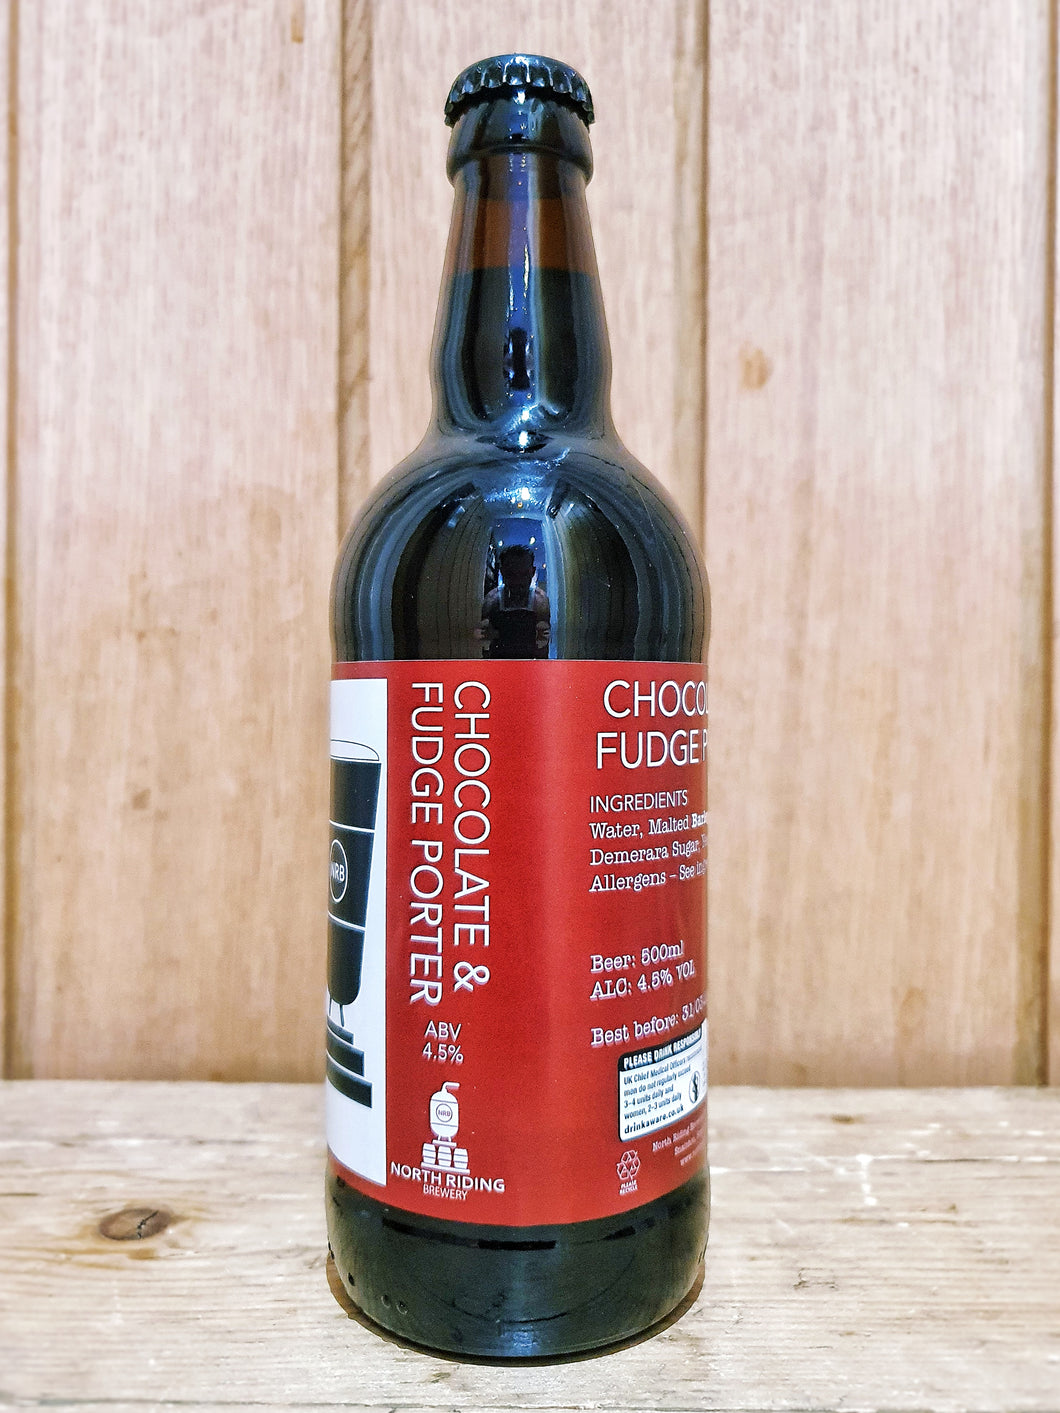 North Riding Brewery - Chocolate and Fudge Porter